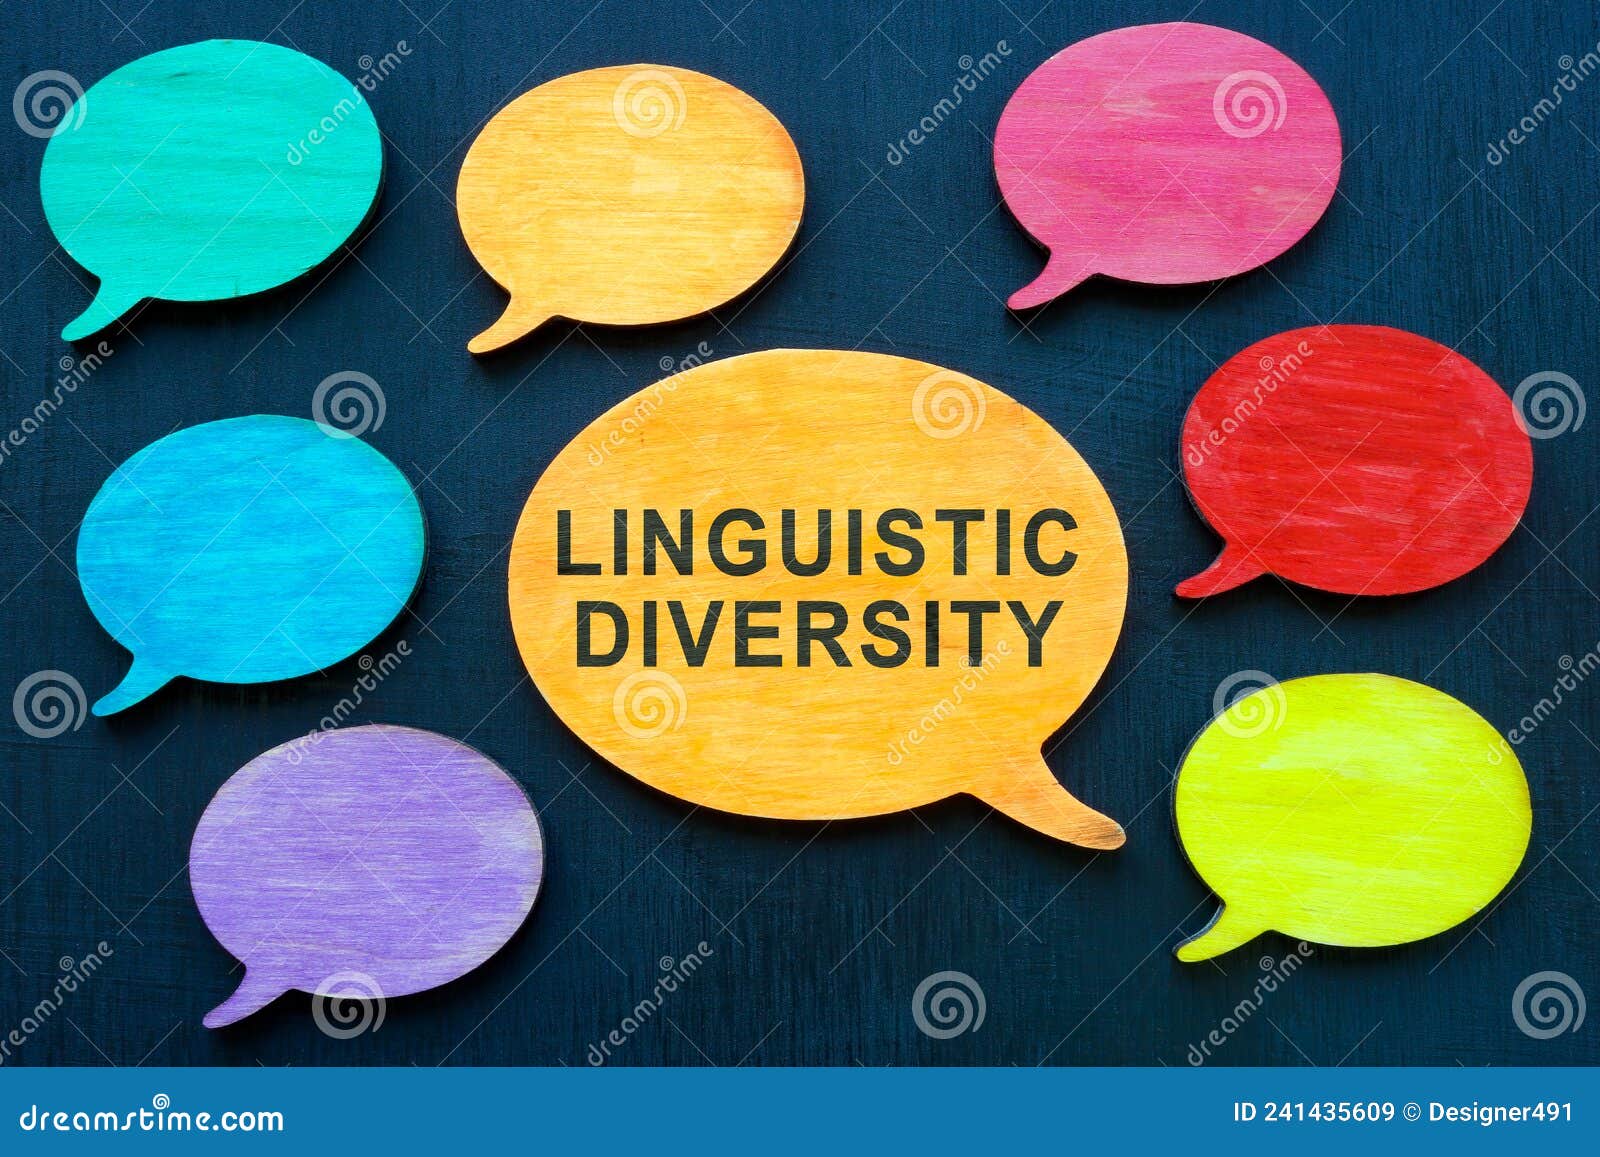 linguistic diversity. multicolored quote bubble and big one.